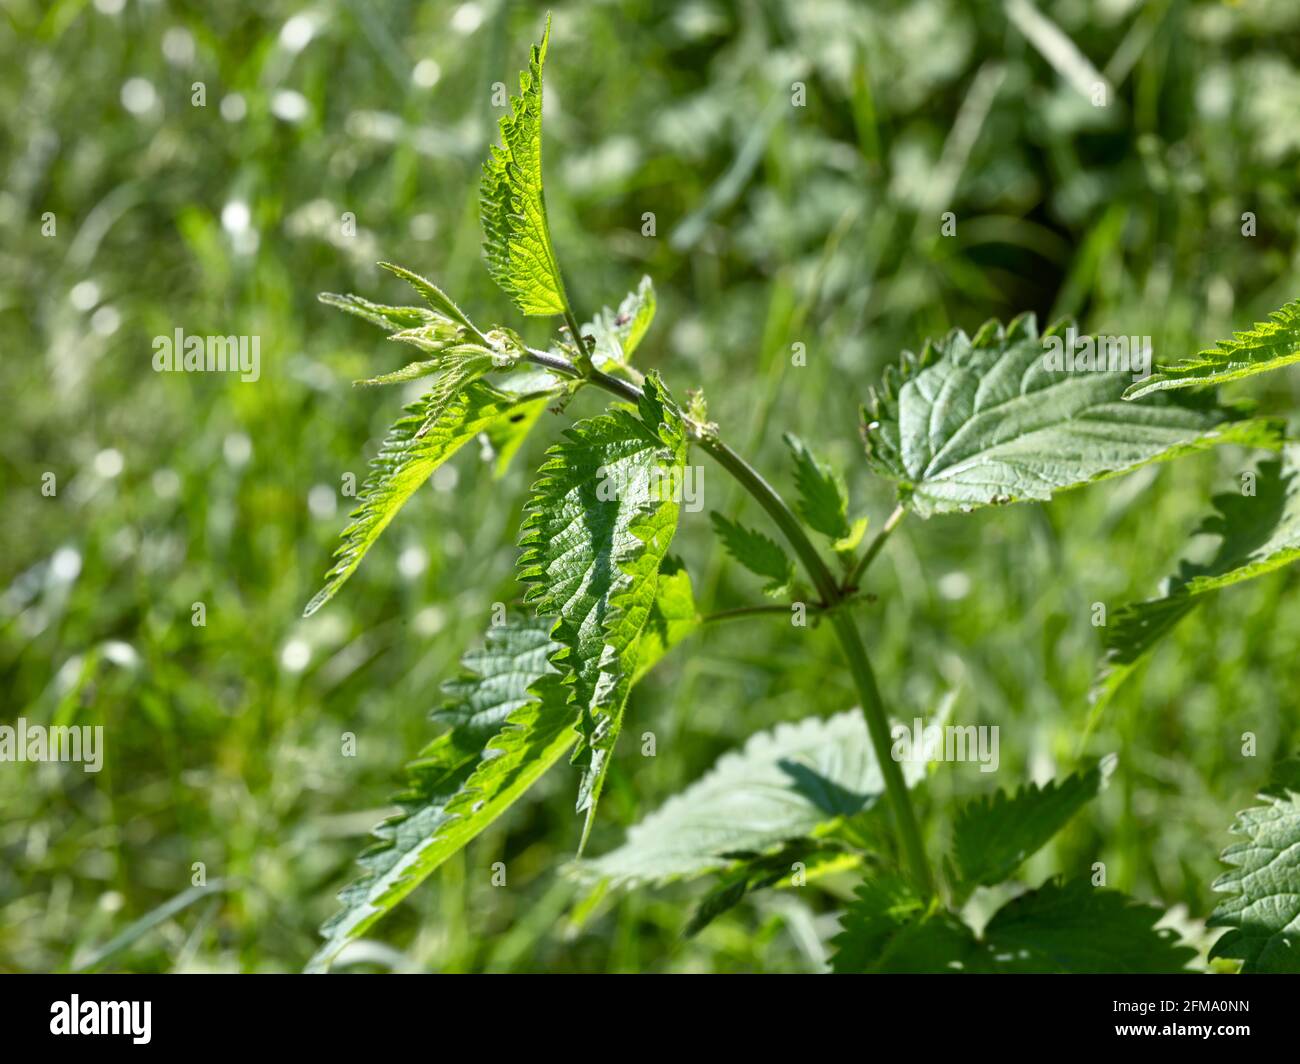 Nettle as a medicinal plant: nettle before flowering Stock Photo